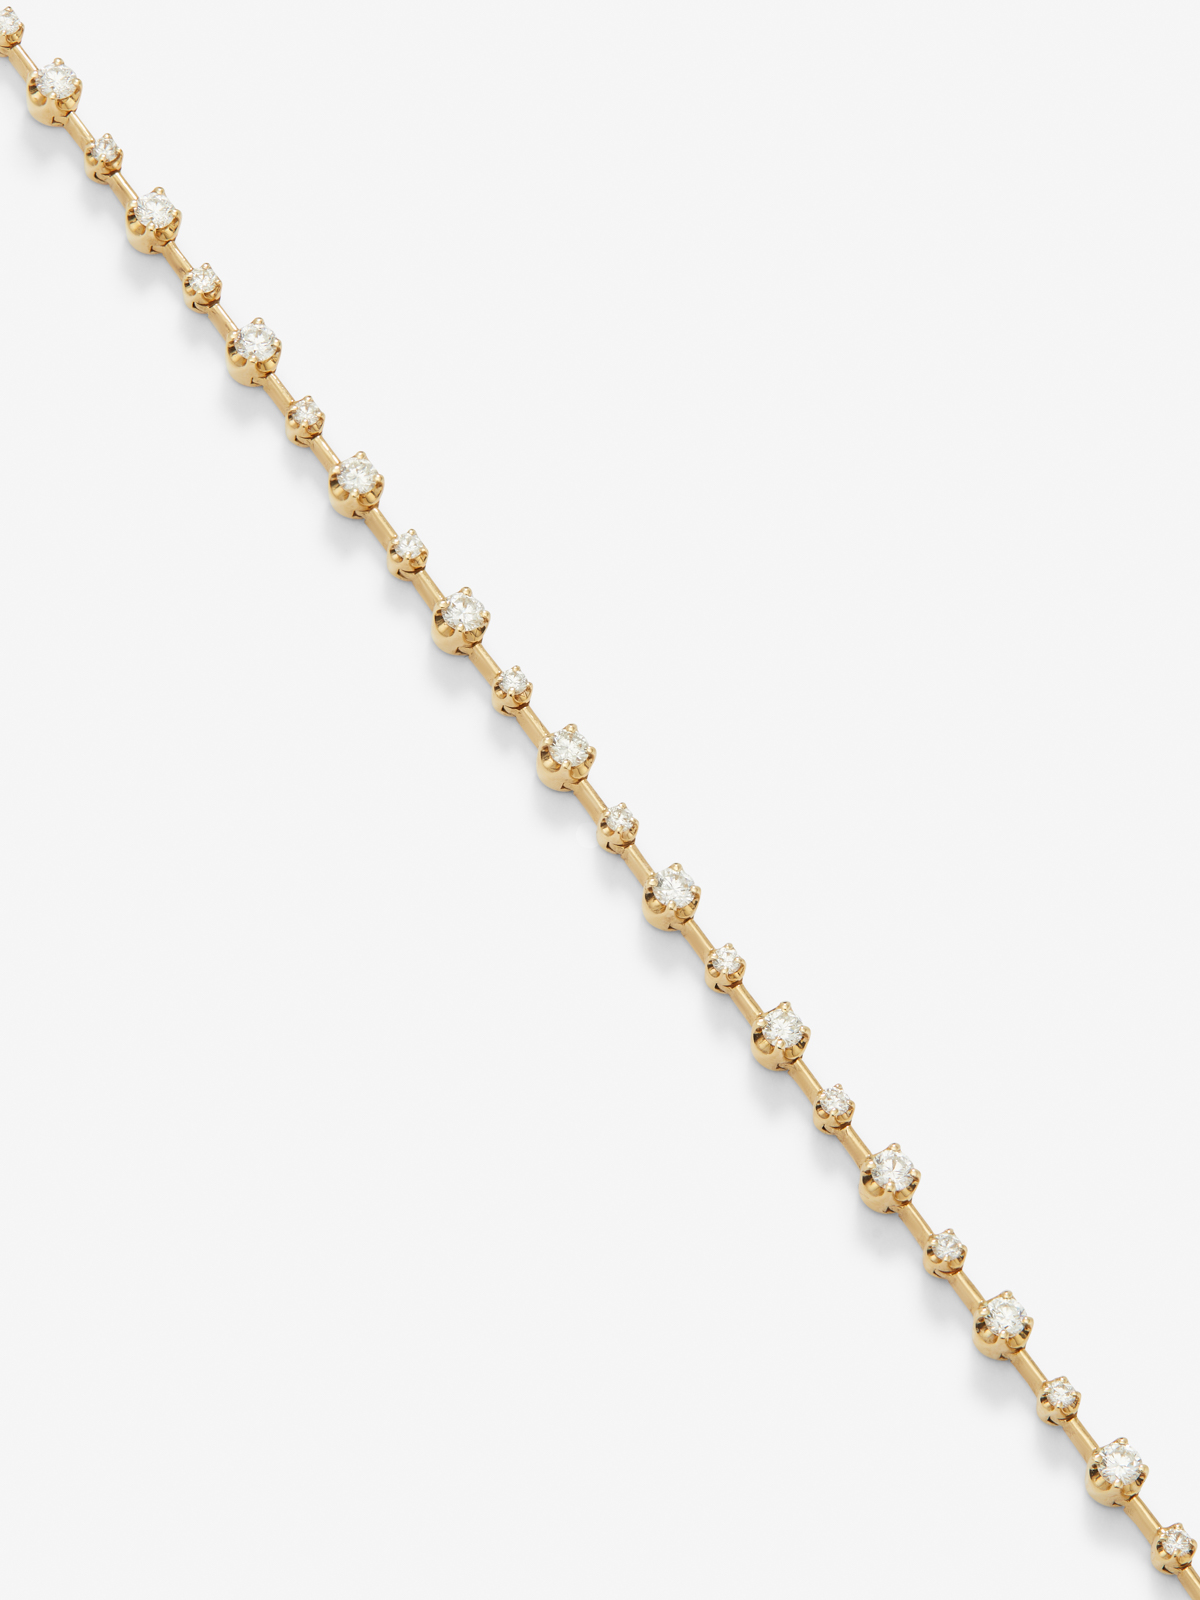 18K Yellow Gold Riviere Choker Necklace with Diamonds